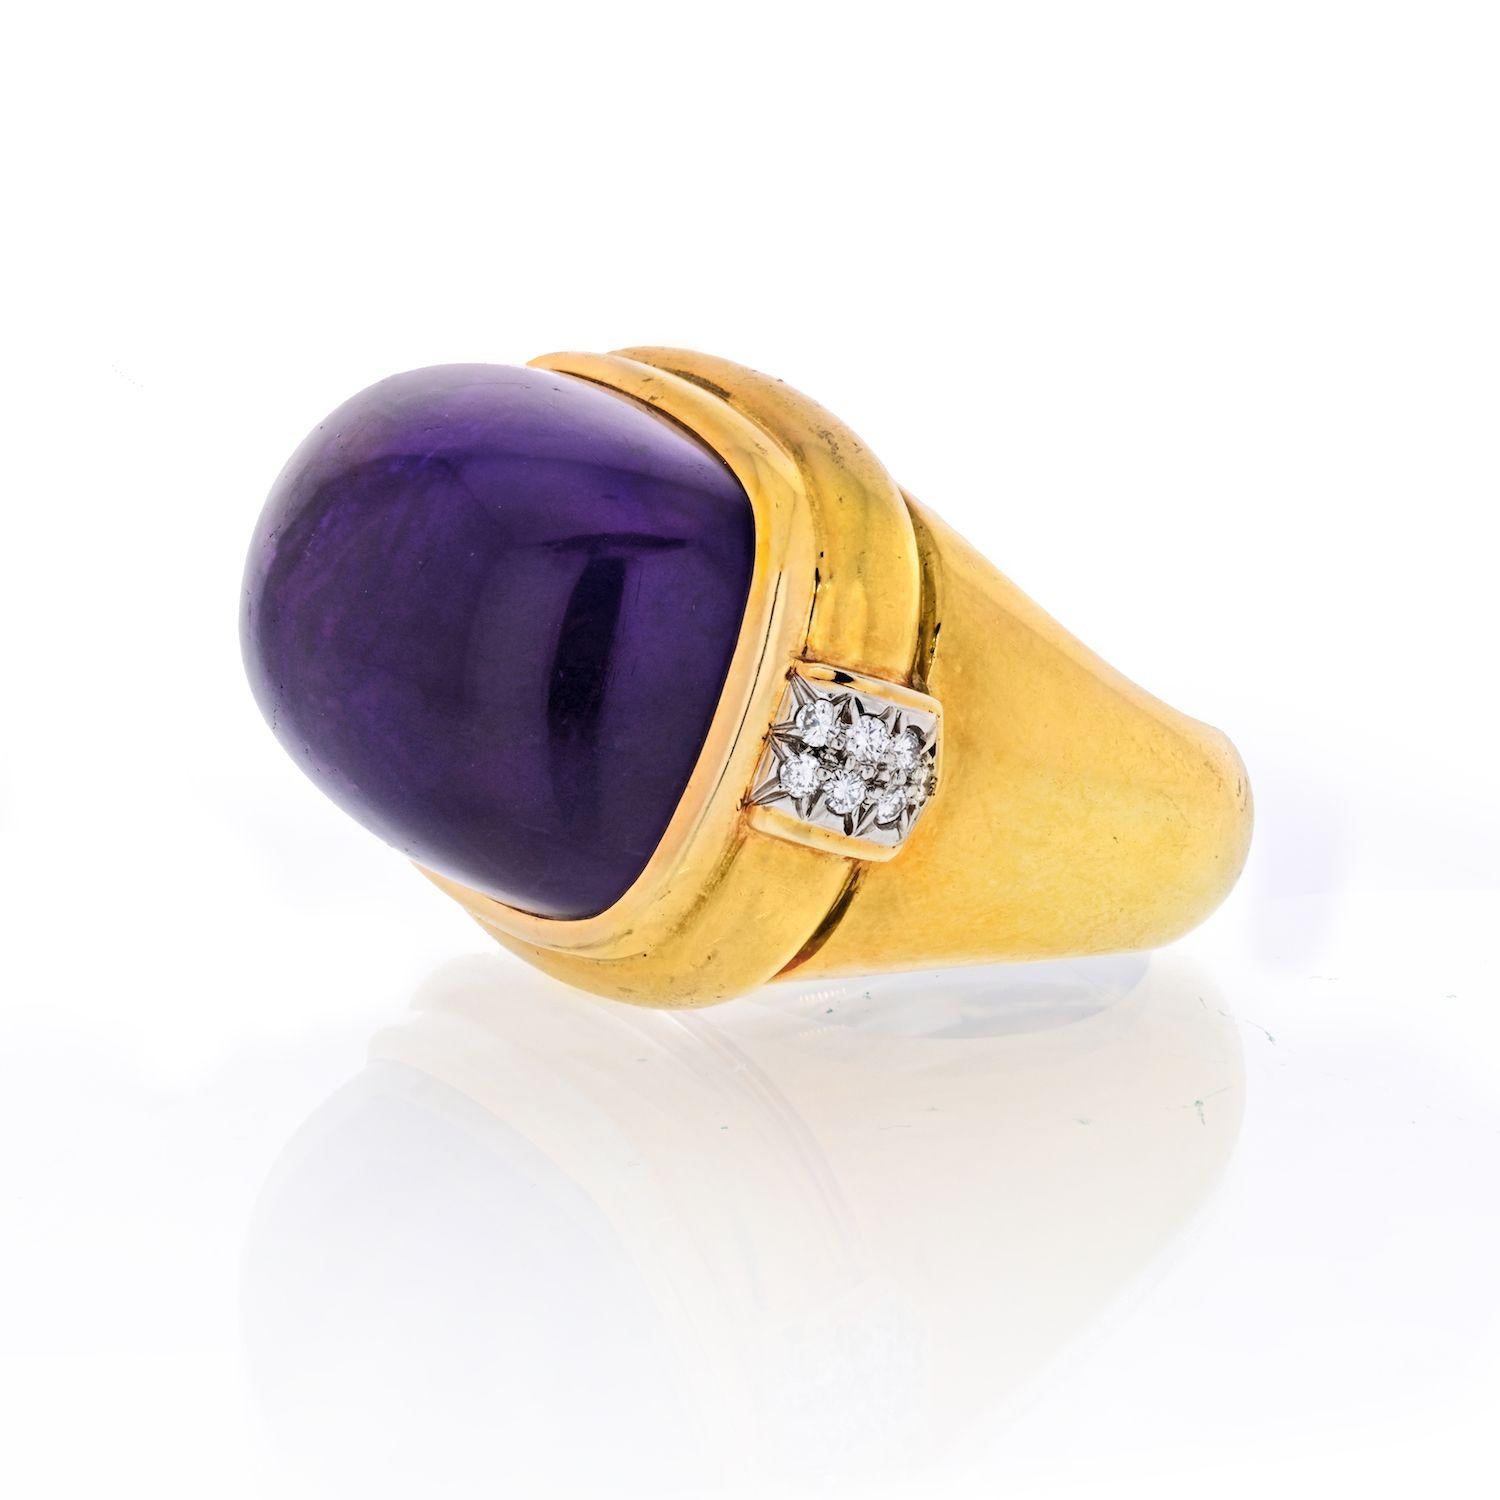 Vintage cabochon amethyst ring by David Webb crafted in 18K Yellow Gold. Mounted with purple amethyst and pave round cut diamonds. 
Curently size 6 can stretch to 7. 
Large statement piece.
Measures: 32mm wide and 22mm long. 
Amethyst has slight